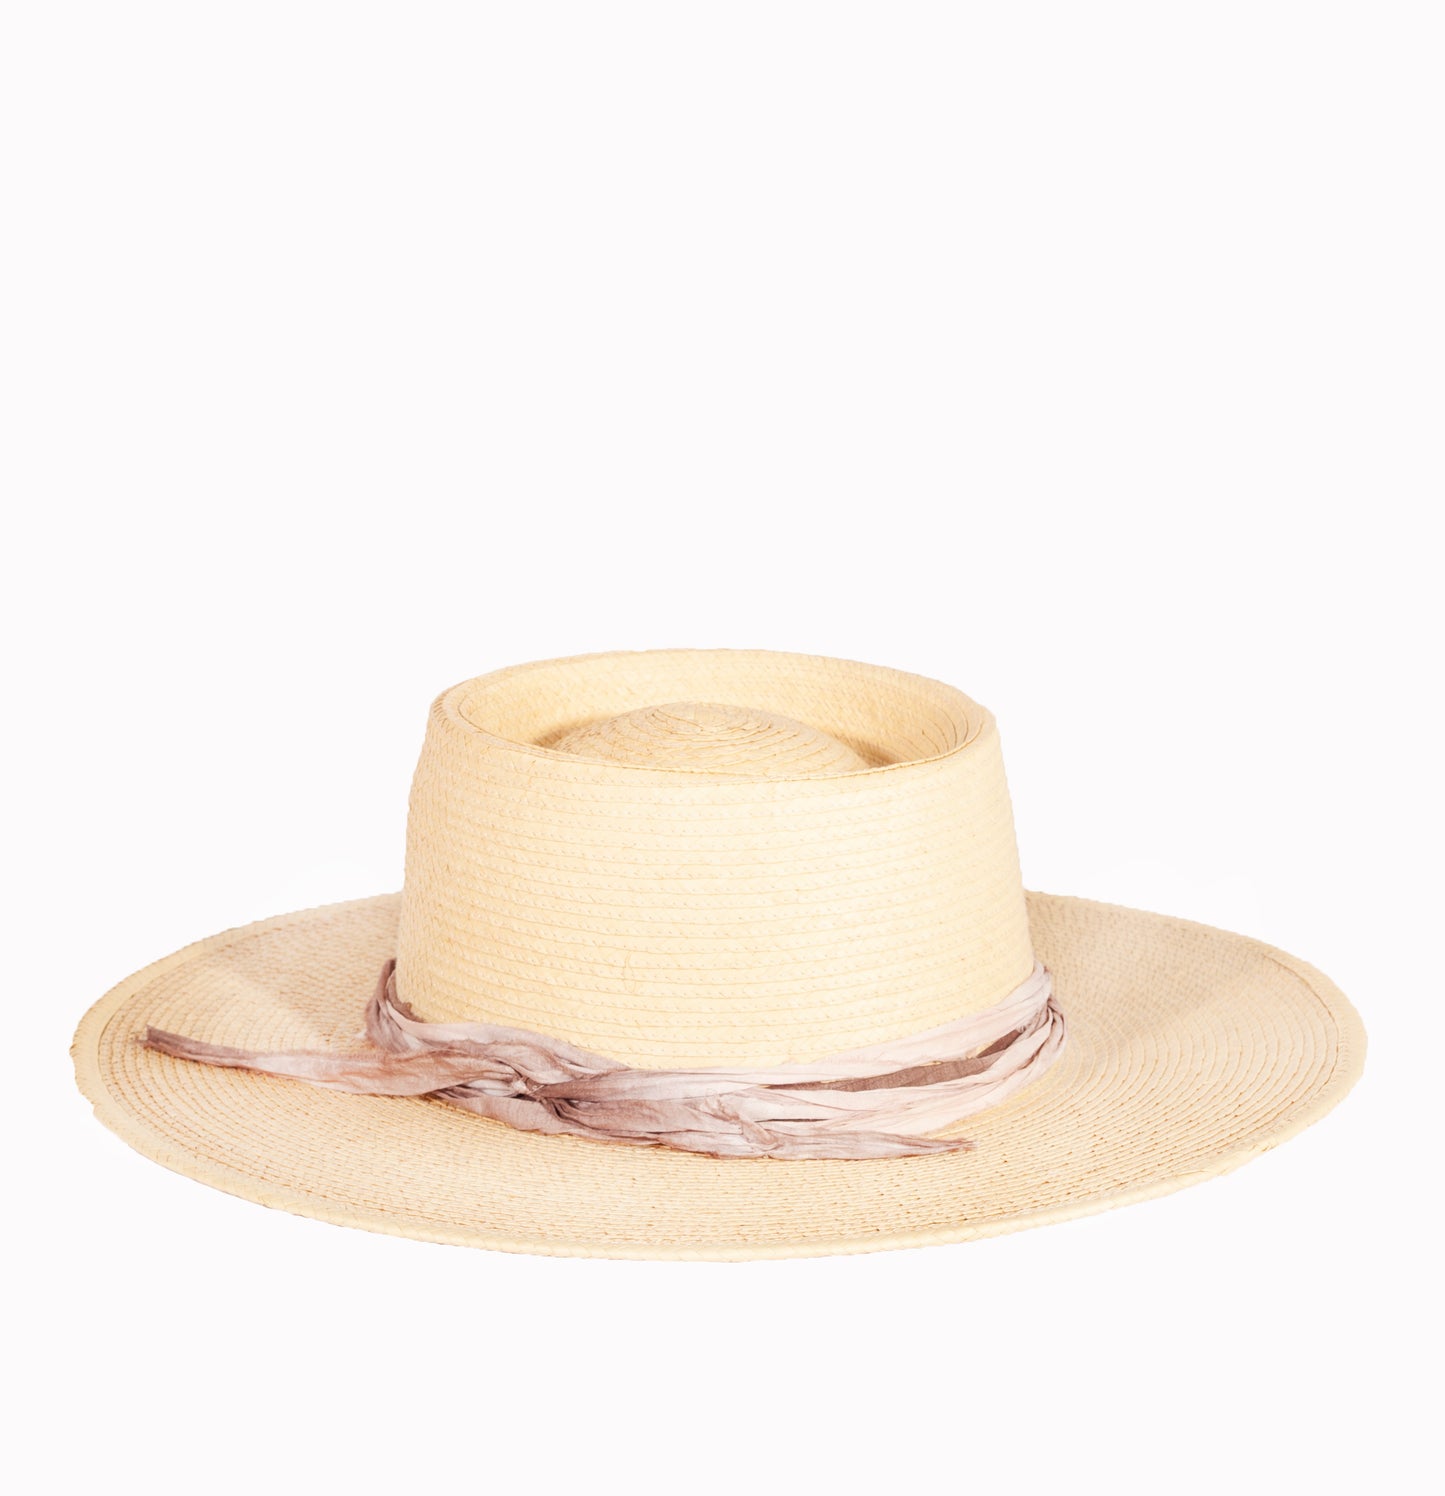 Distressed custom 100% straw hat frayed brim. Made in USA.   Every Hat Is Made To Order: No Mass Production, Less Waste, More Love. Discover Your Hat Size, Select Colors, The Design And Finishings. Ready To Ship Designs. Handmade. One-of-a-kind. Ethically Sourced. Types: Fur Felt, Handwoven Straw, Custom, Made-to-order. Inspirations: Fedora, Western, Cowboy, Bucket, Mad Hatter, Top Hat, Derby, Bowler and contemporary psychedelic.